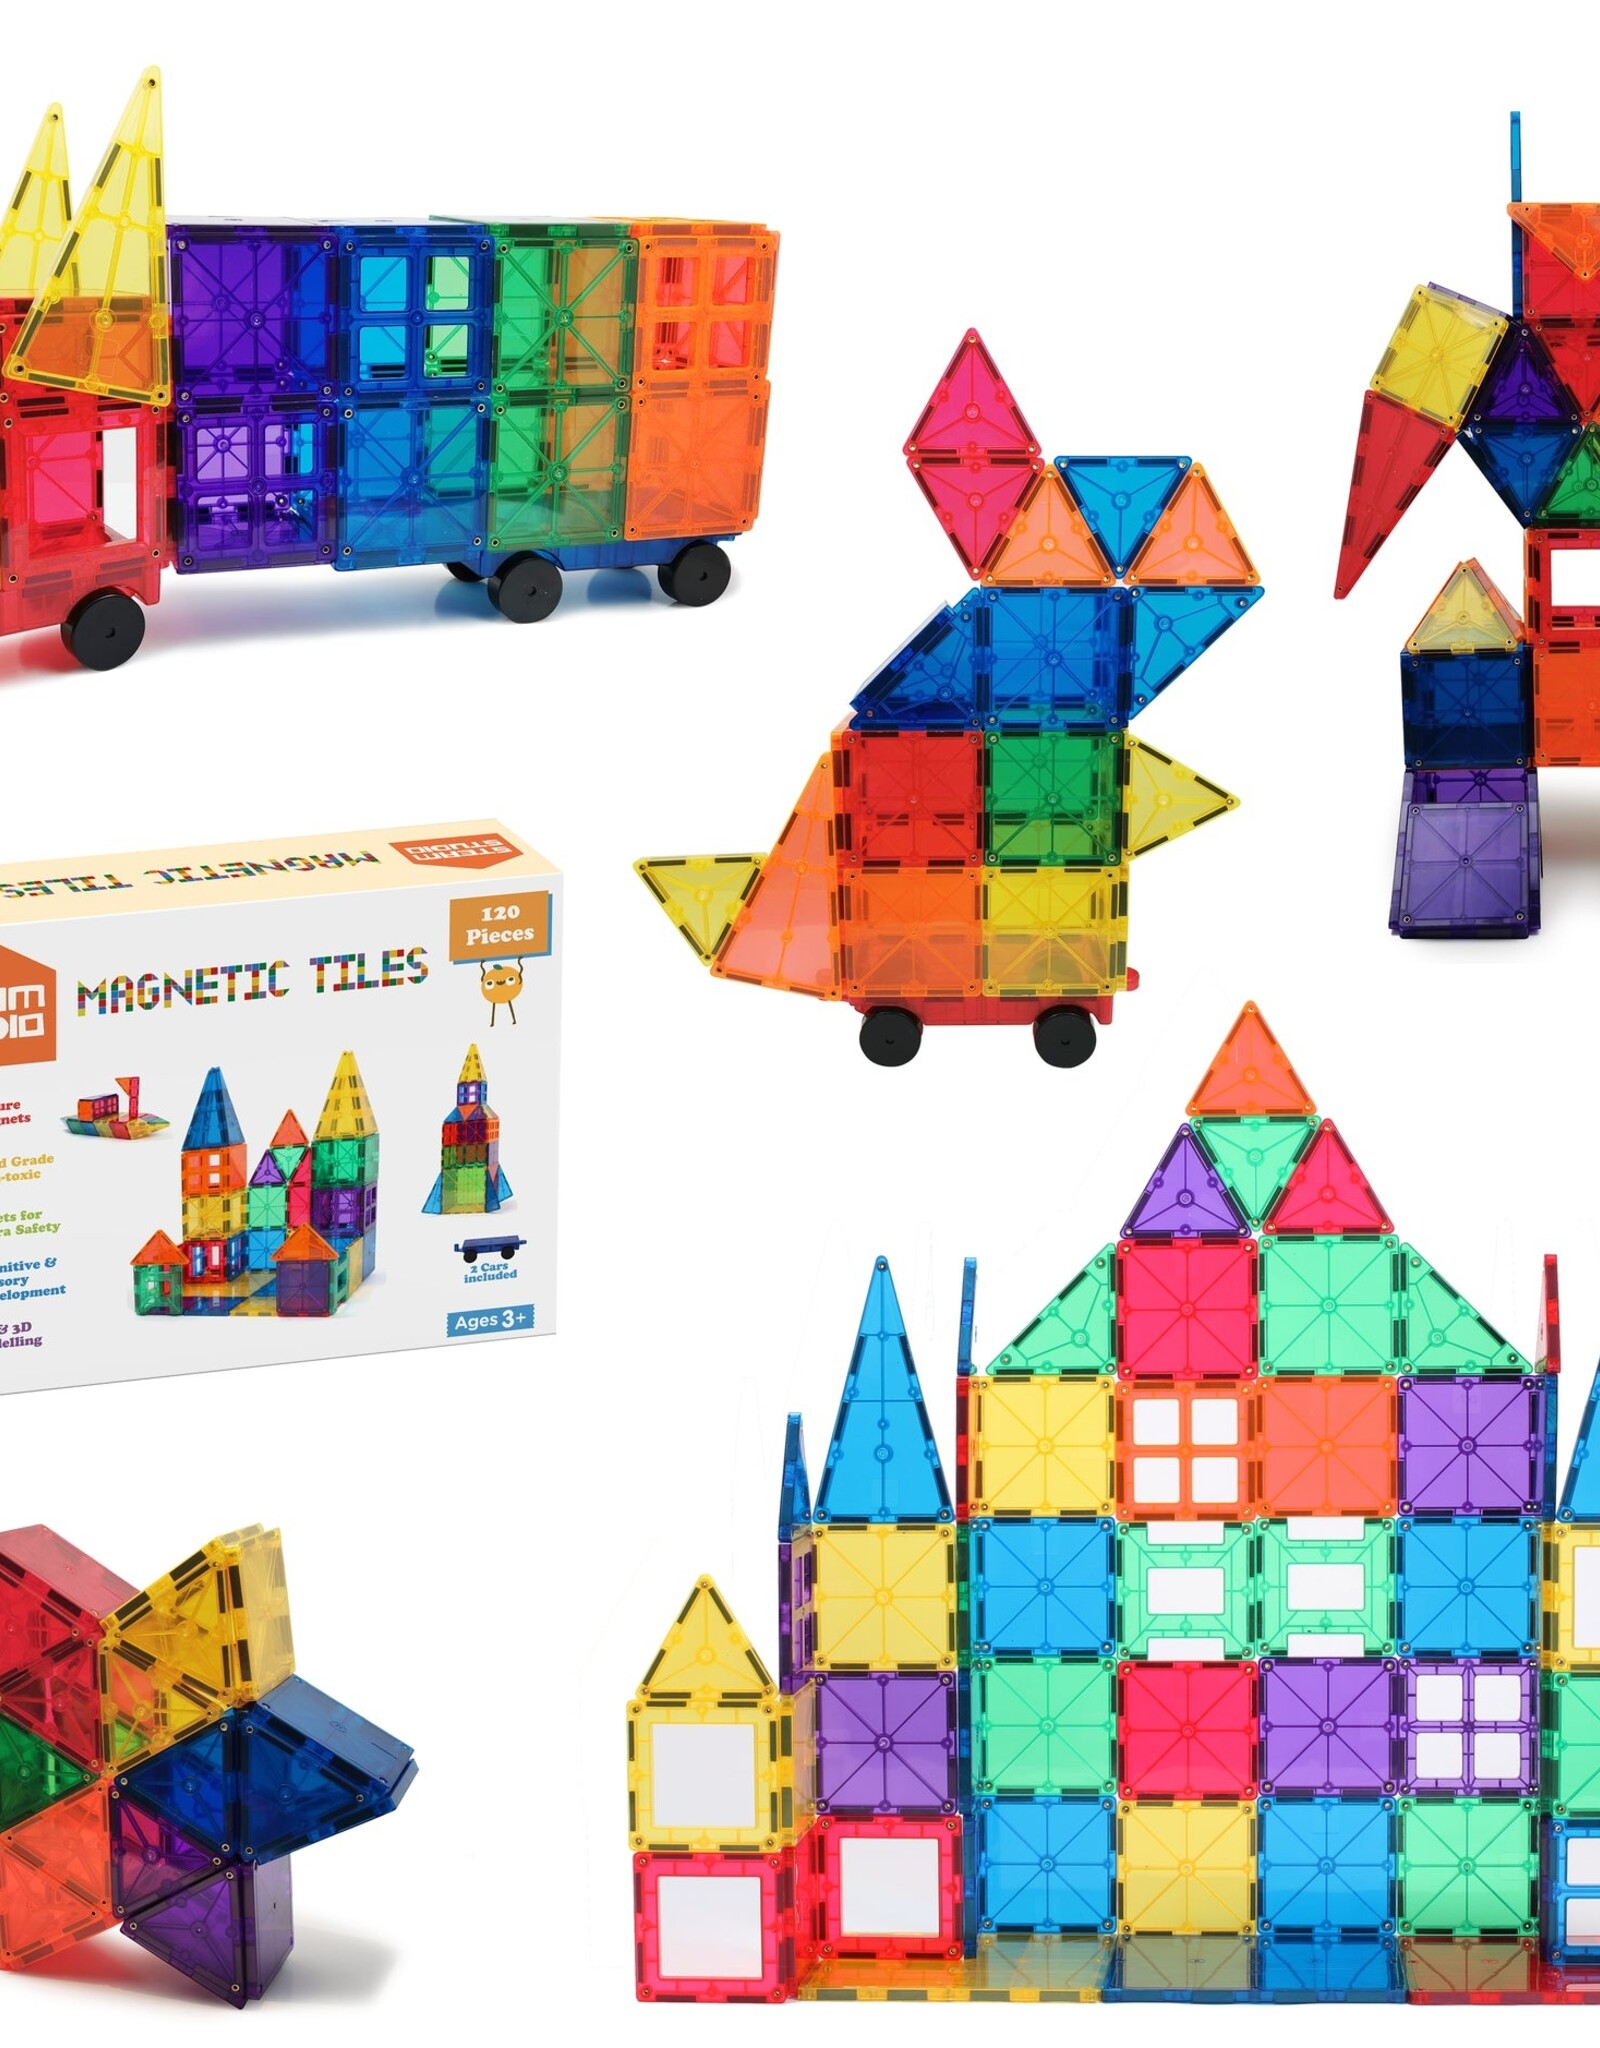 Steam Studio Steam Studio - Magnetic Star Tiles 120 Pieces Rainbow Pack With 2 Cars